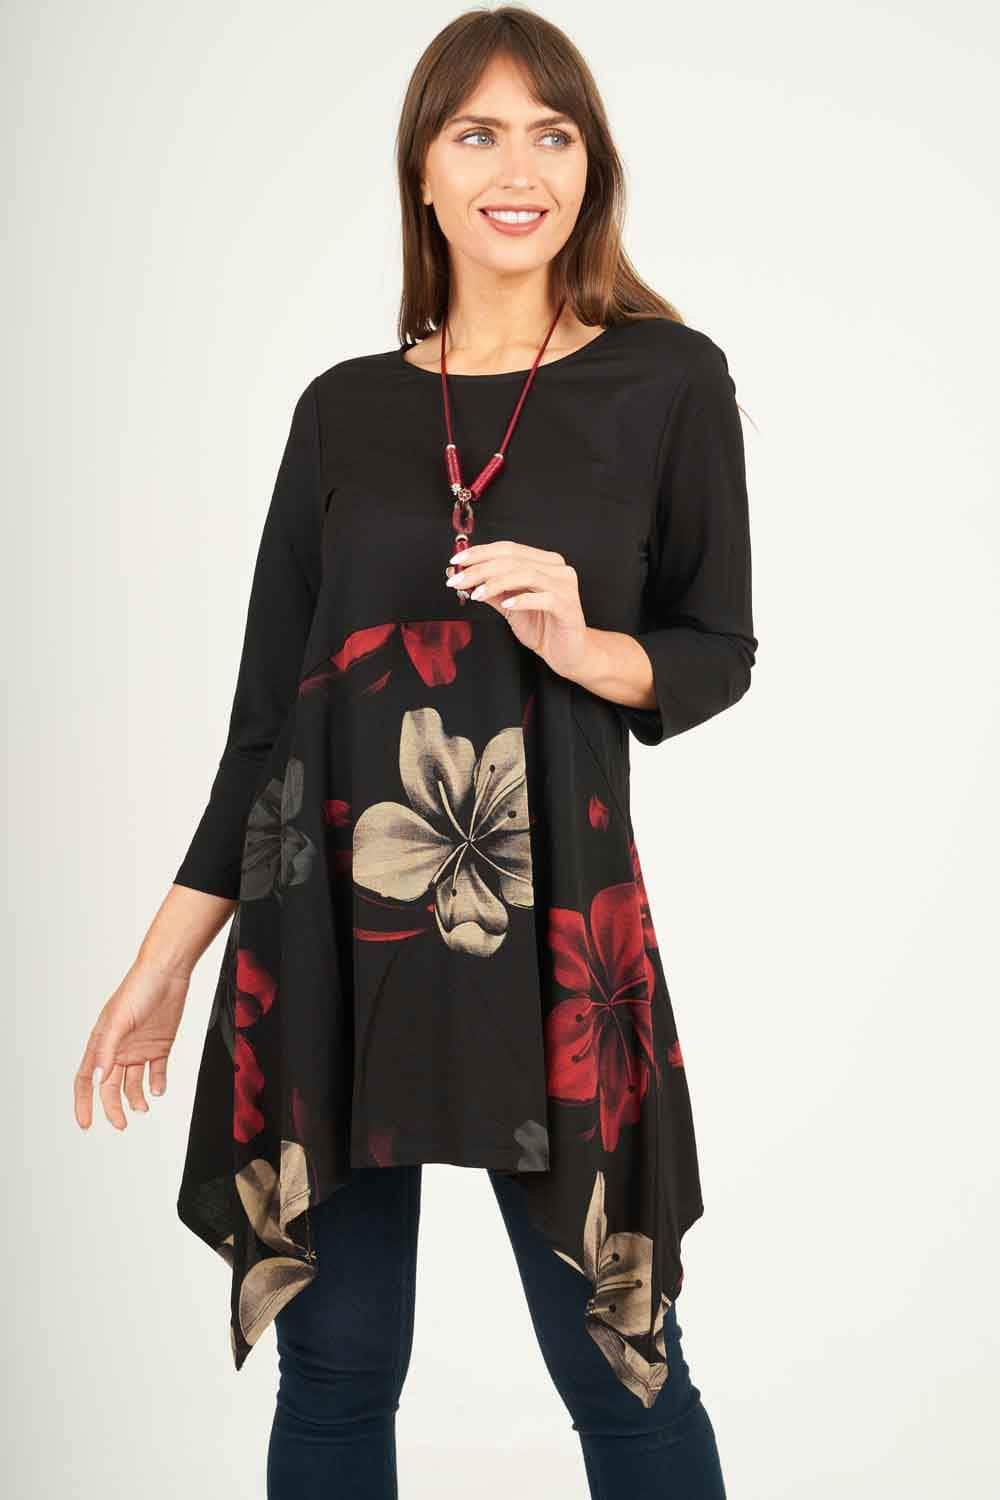 Saloos Dress 10 / Red Cotton-Rich A-Line Tunic Dress with Necklace